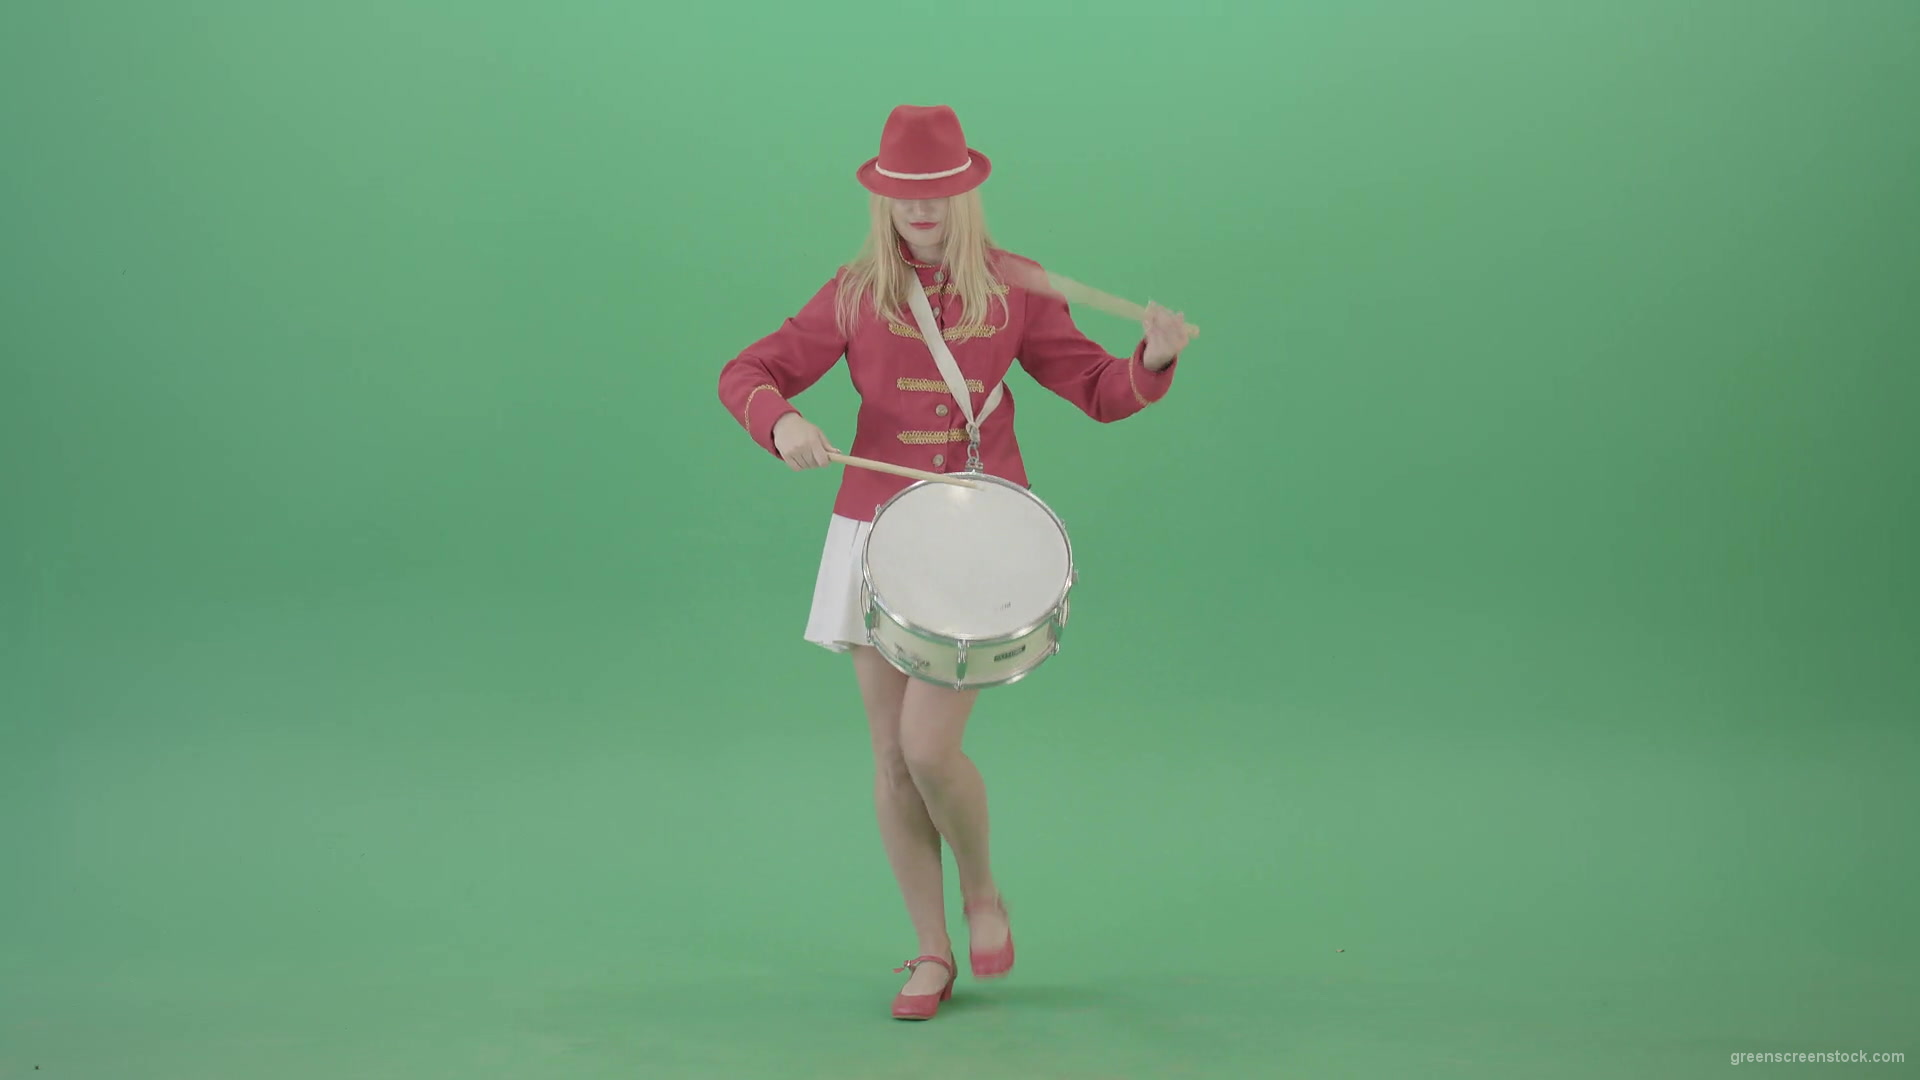 Girl-in-red-dress-marching-and-playing-drum-snare-music-instrument-over-green-screen-4K-Video-Footage-1920_009 Green Screen Stock